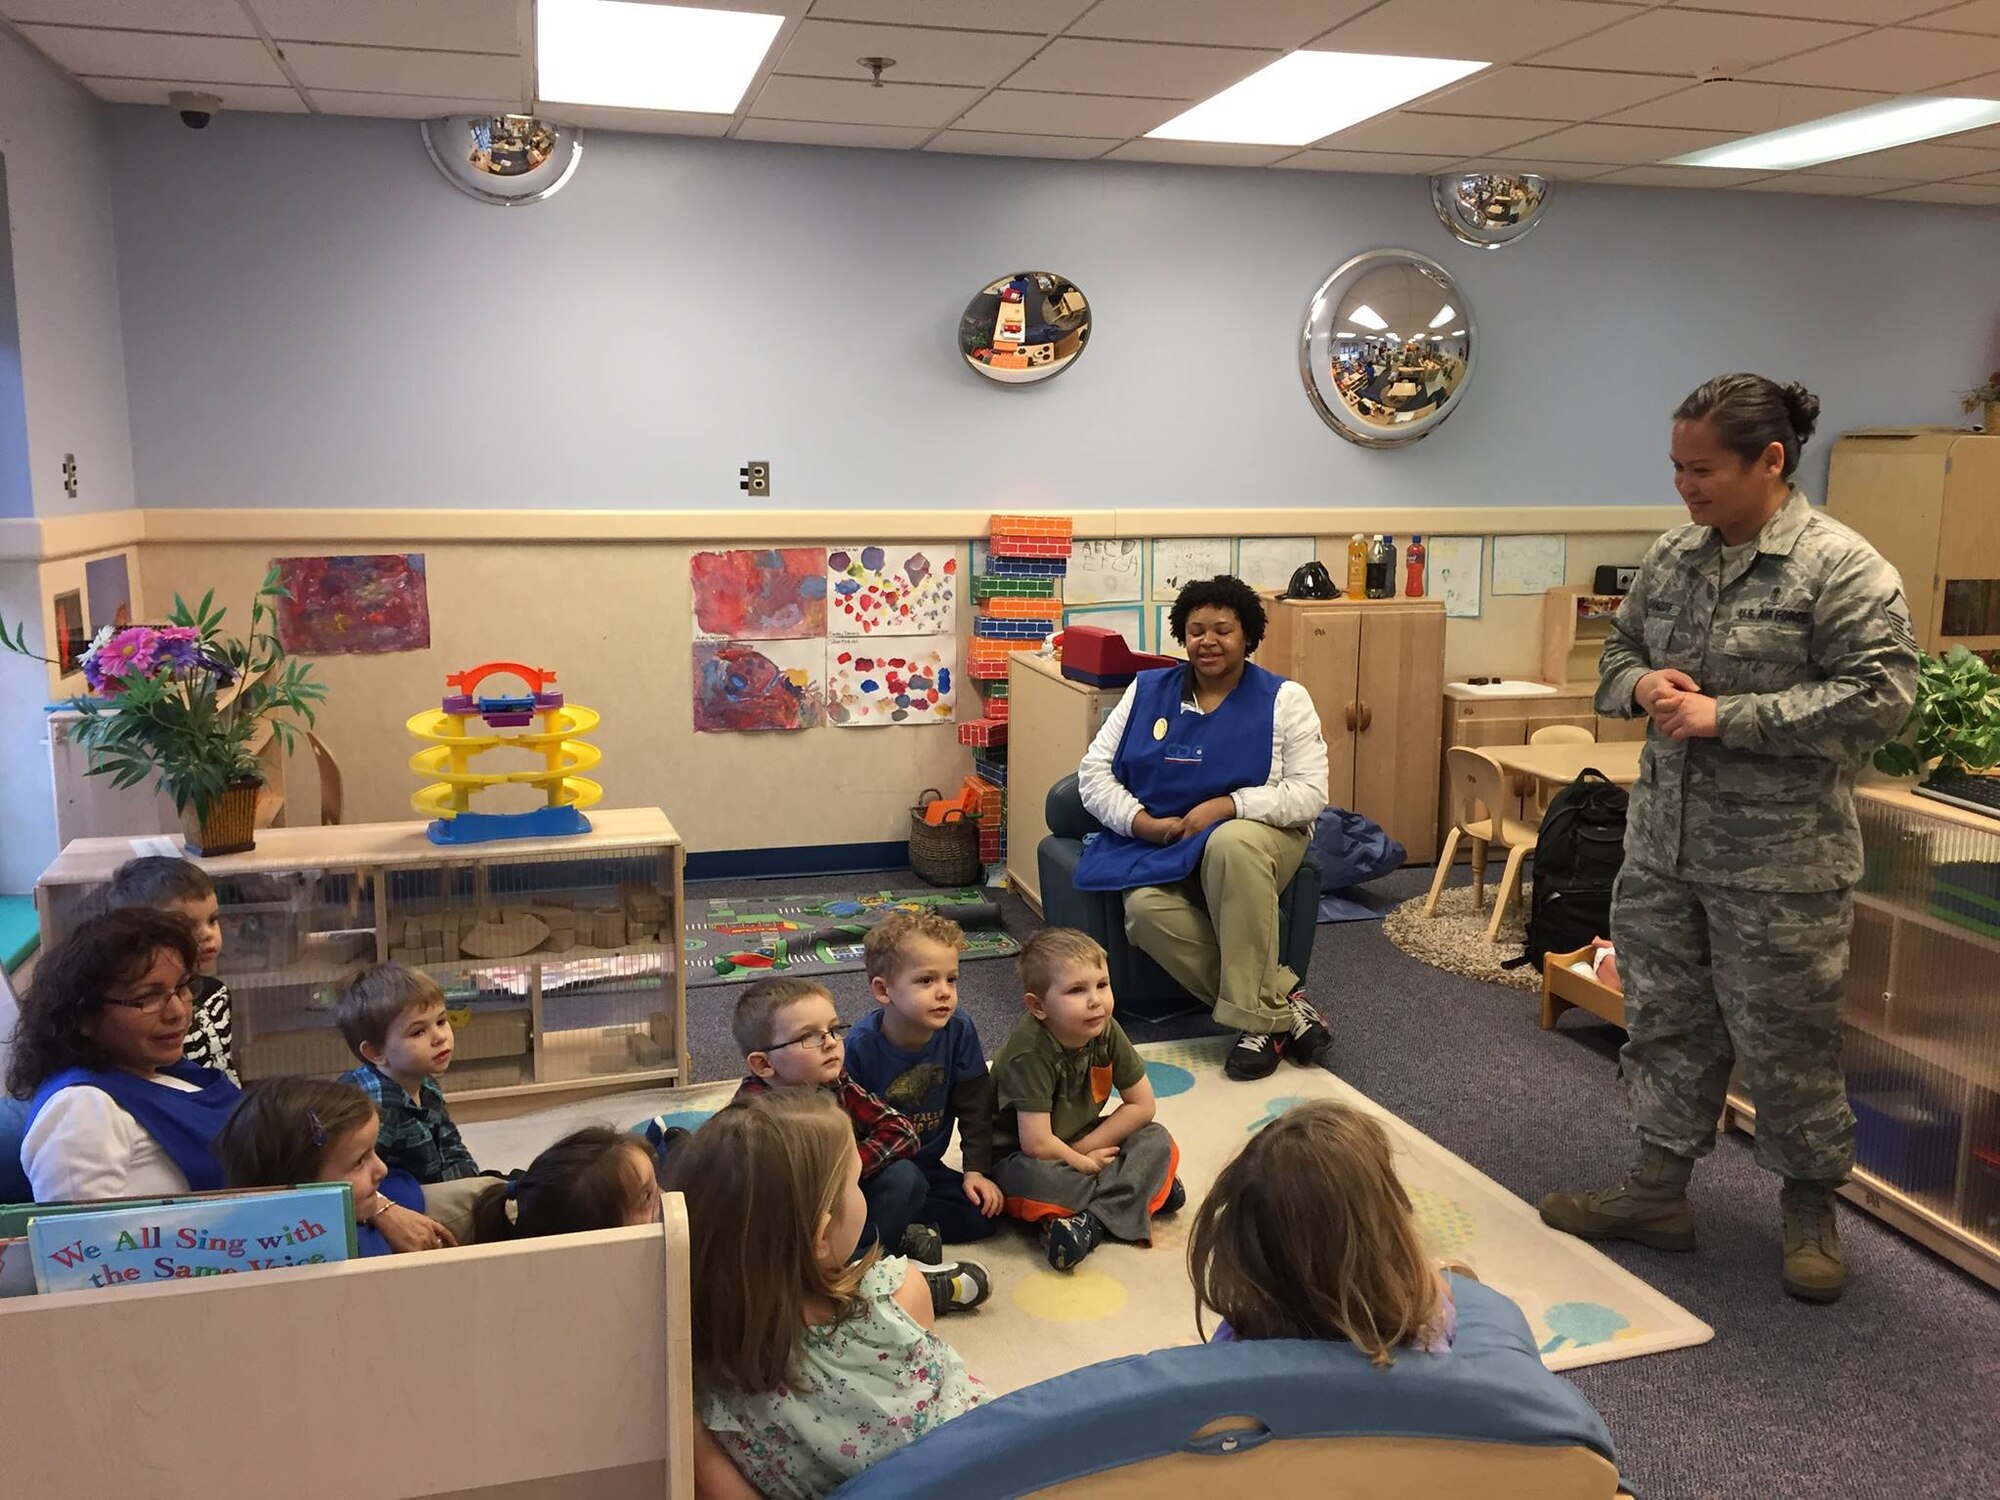 On Feb. 5, members of the Dental Squadron from the 779th Medical Group went to the Child Development Center on Joint Base Andrews to teach the kids about good dental health. Master Sgt. Millicent Cavazos, dental hygienist , talked to the children and answered their questions about brushing, flossing, rinsing, and eating healthy snacks.